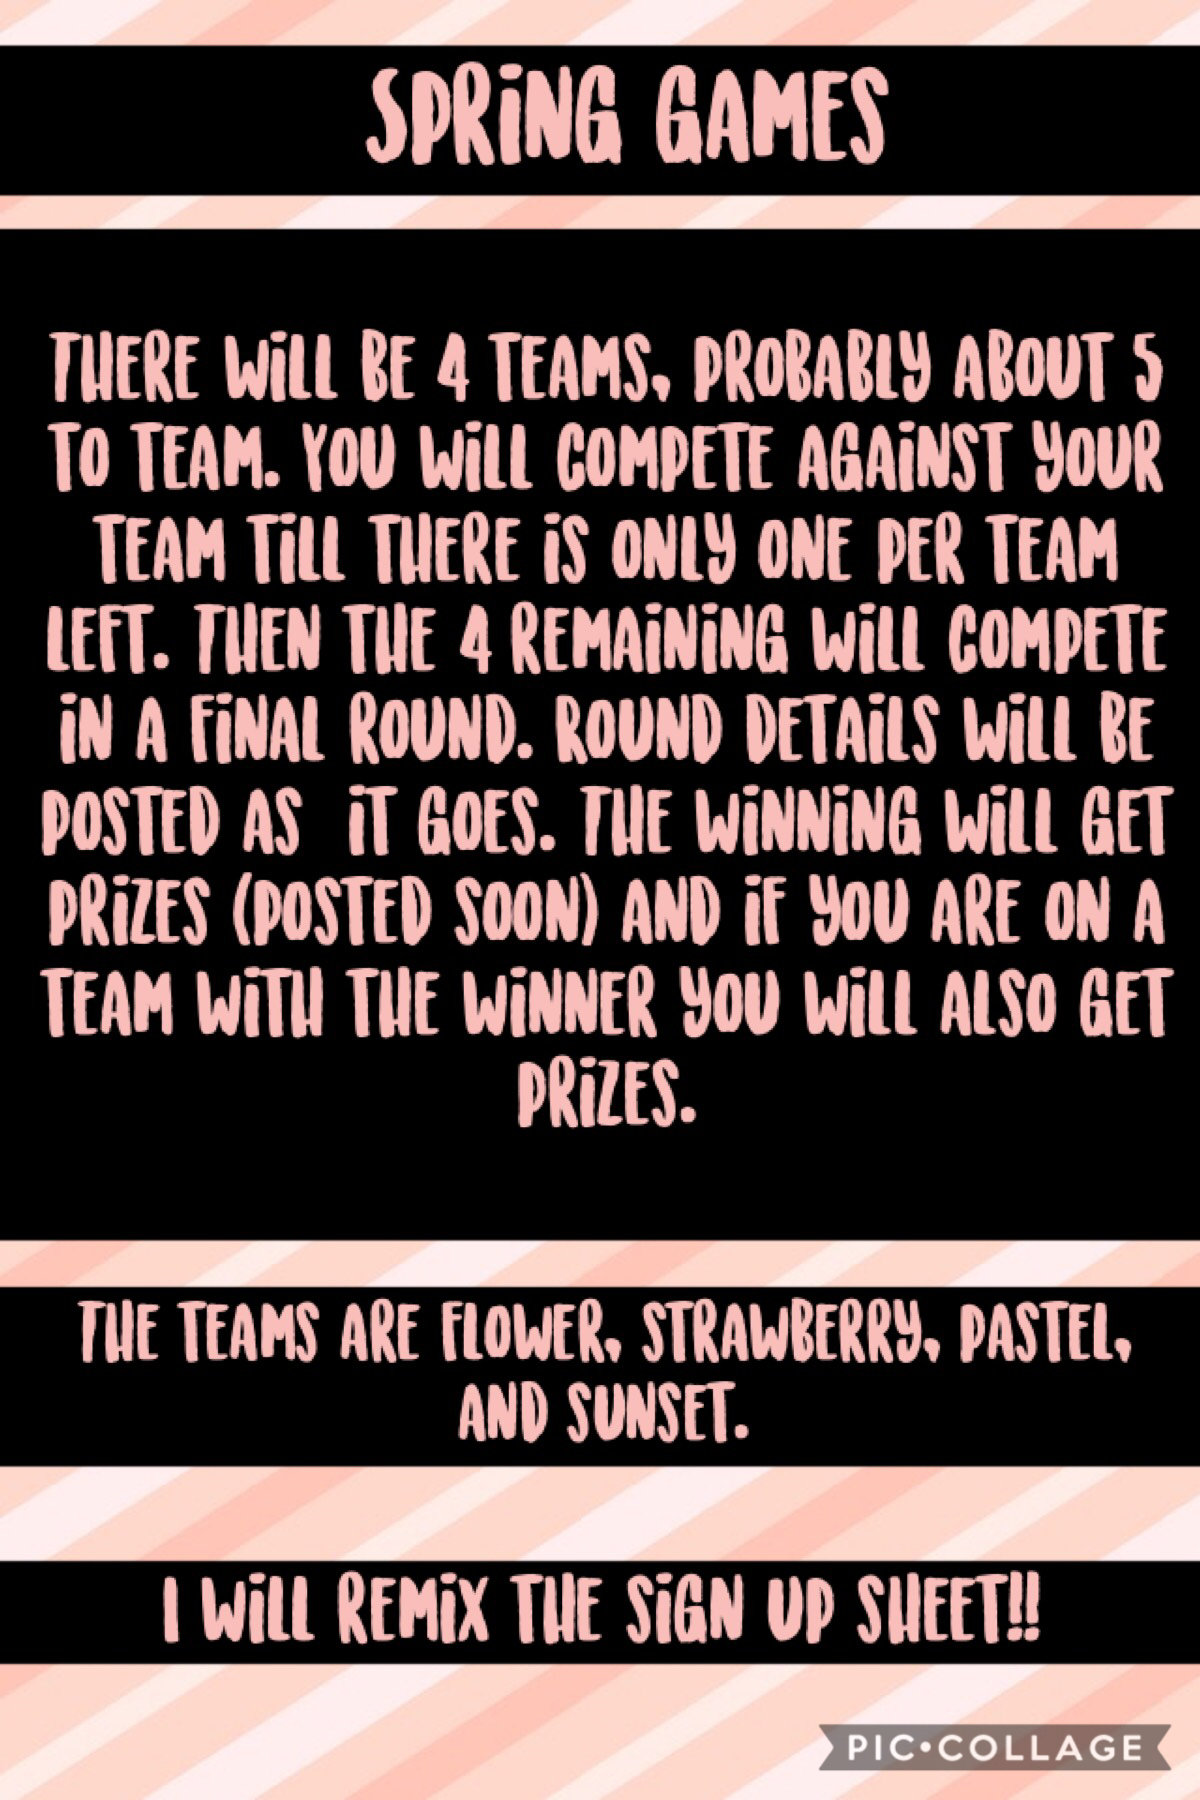 Please join!!!!!!
Sign up in remix’s or just tell me what team you want.